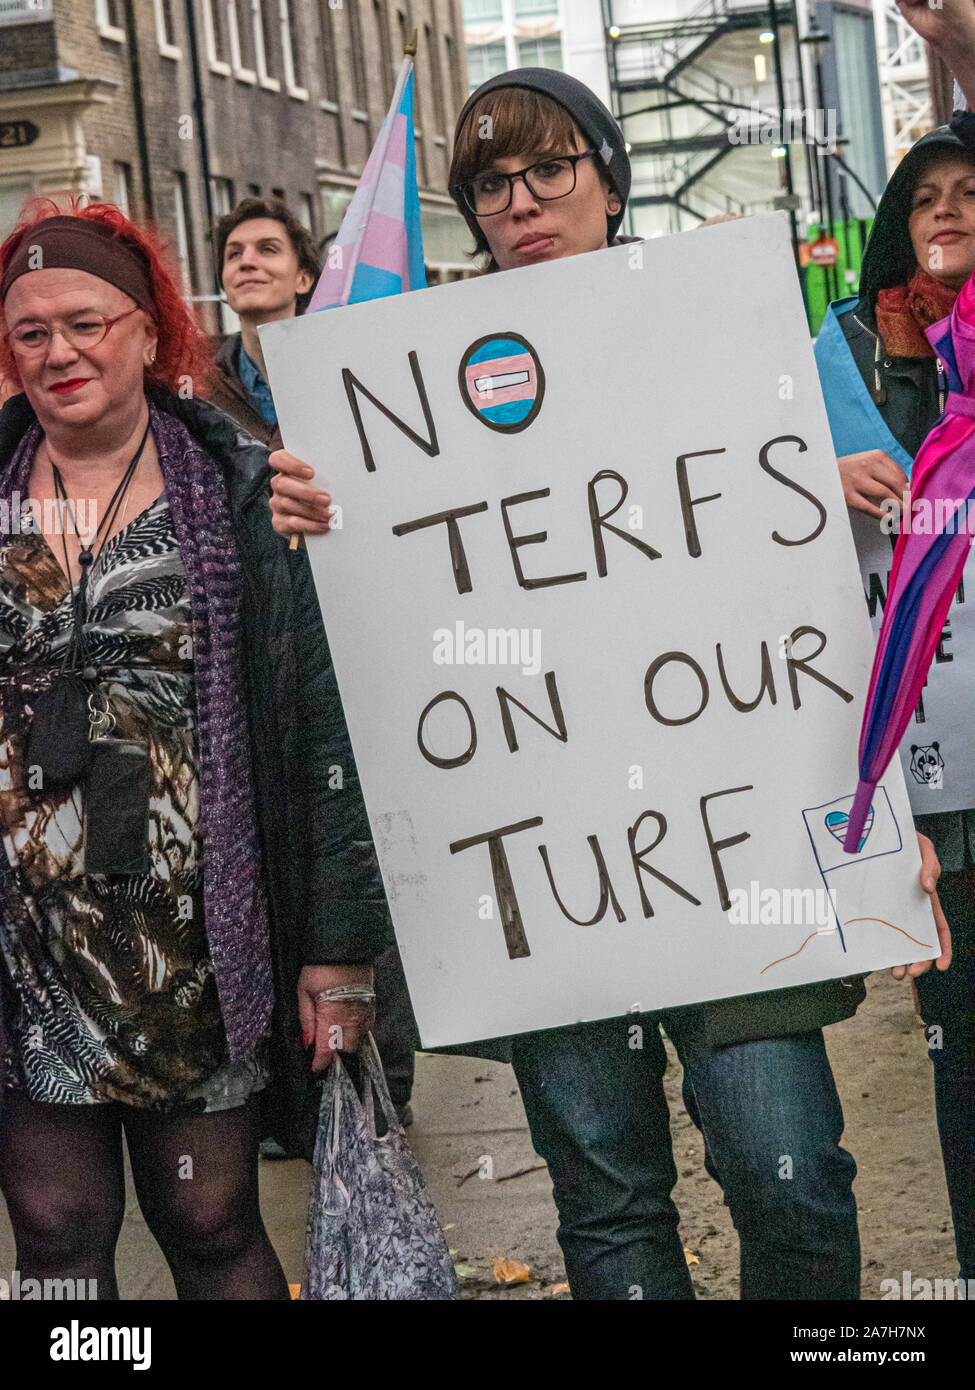 London, UK. 2nd November 2019. 'No TERFs on our Turf'. A protest in Soho Square opposed the activities of a new hate group which promotes transphobia, calling itself the 'LGB Alliance', claiming it is protecting LGB people. The protest pointed out that trans and non-binary people have always been a part of the gay community and played an important part in the fight for gay rights and there is no place for such bi-phobic and gay-separist views in the gay community. Peter Marshall/Alamy Live News Stock Photo